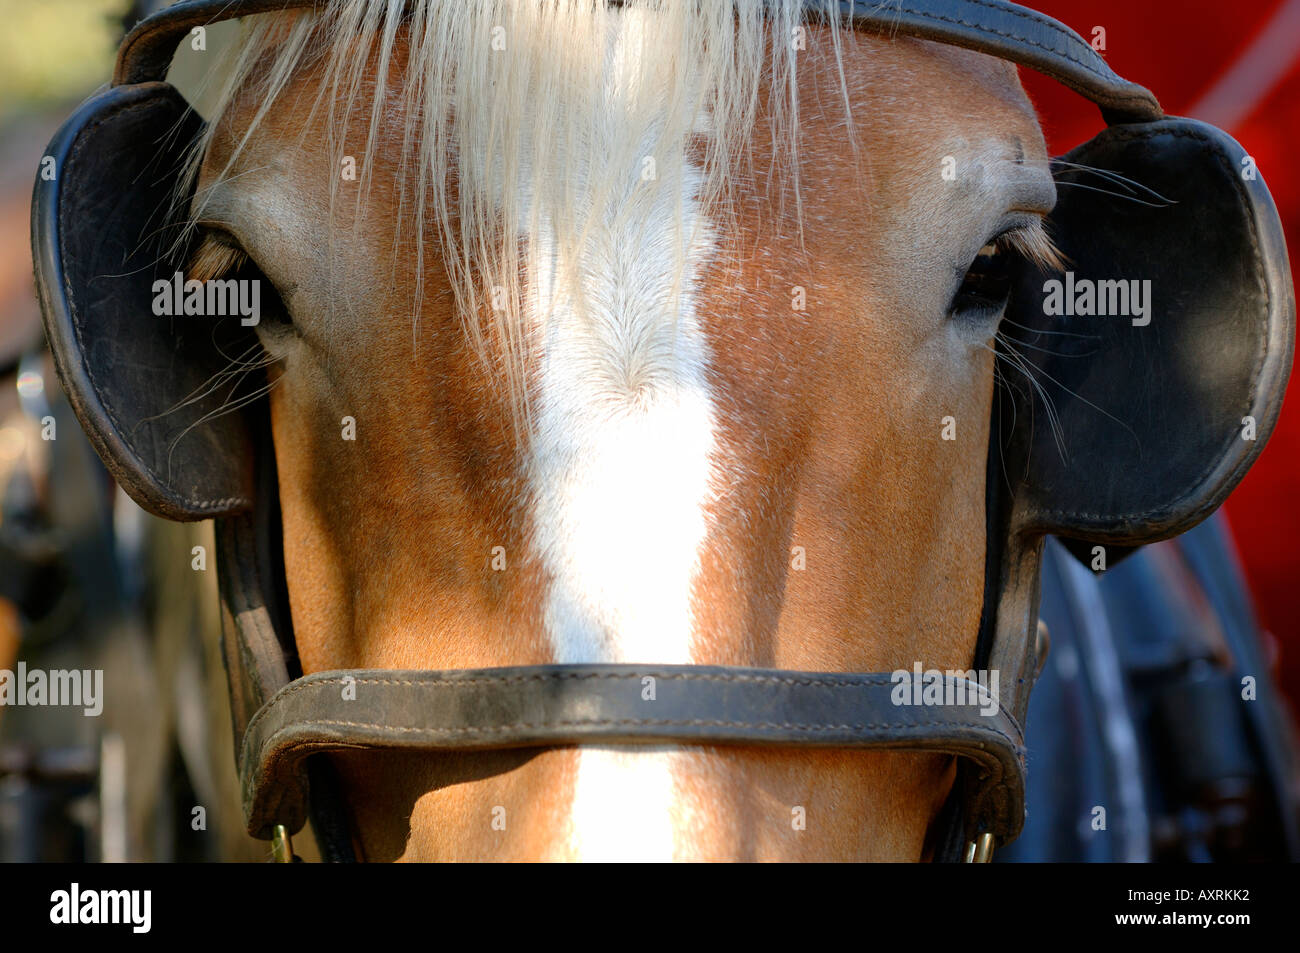 Horse with blinders Stock Photo